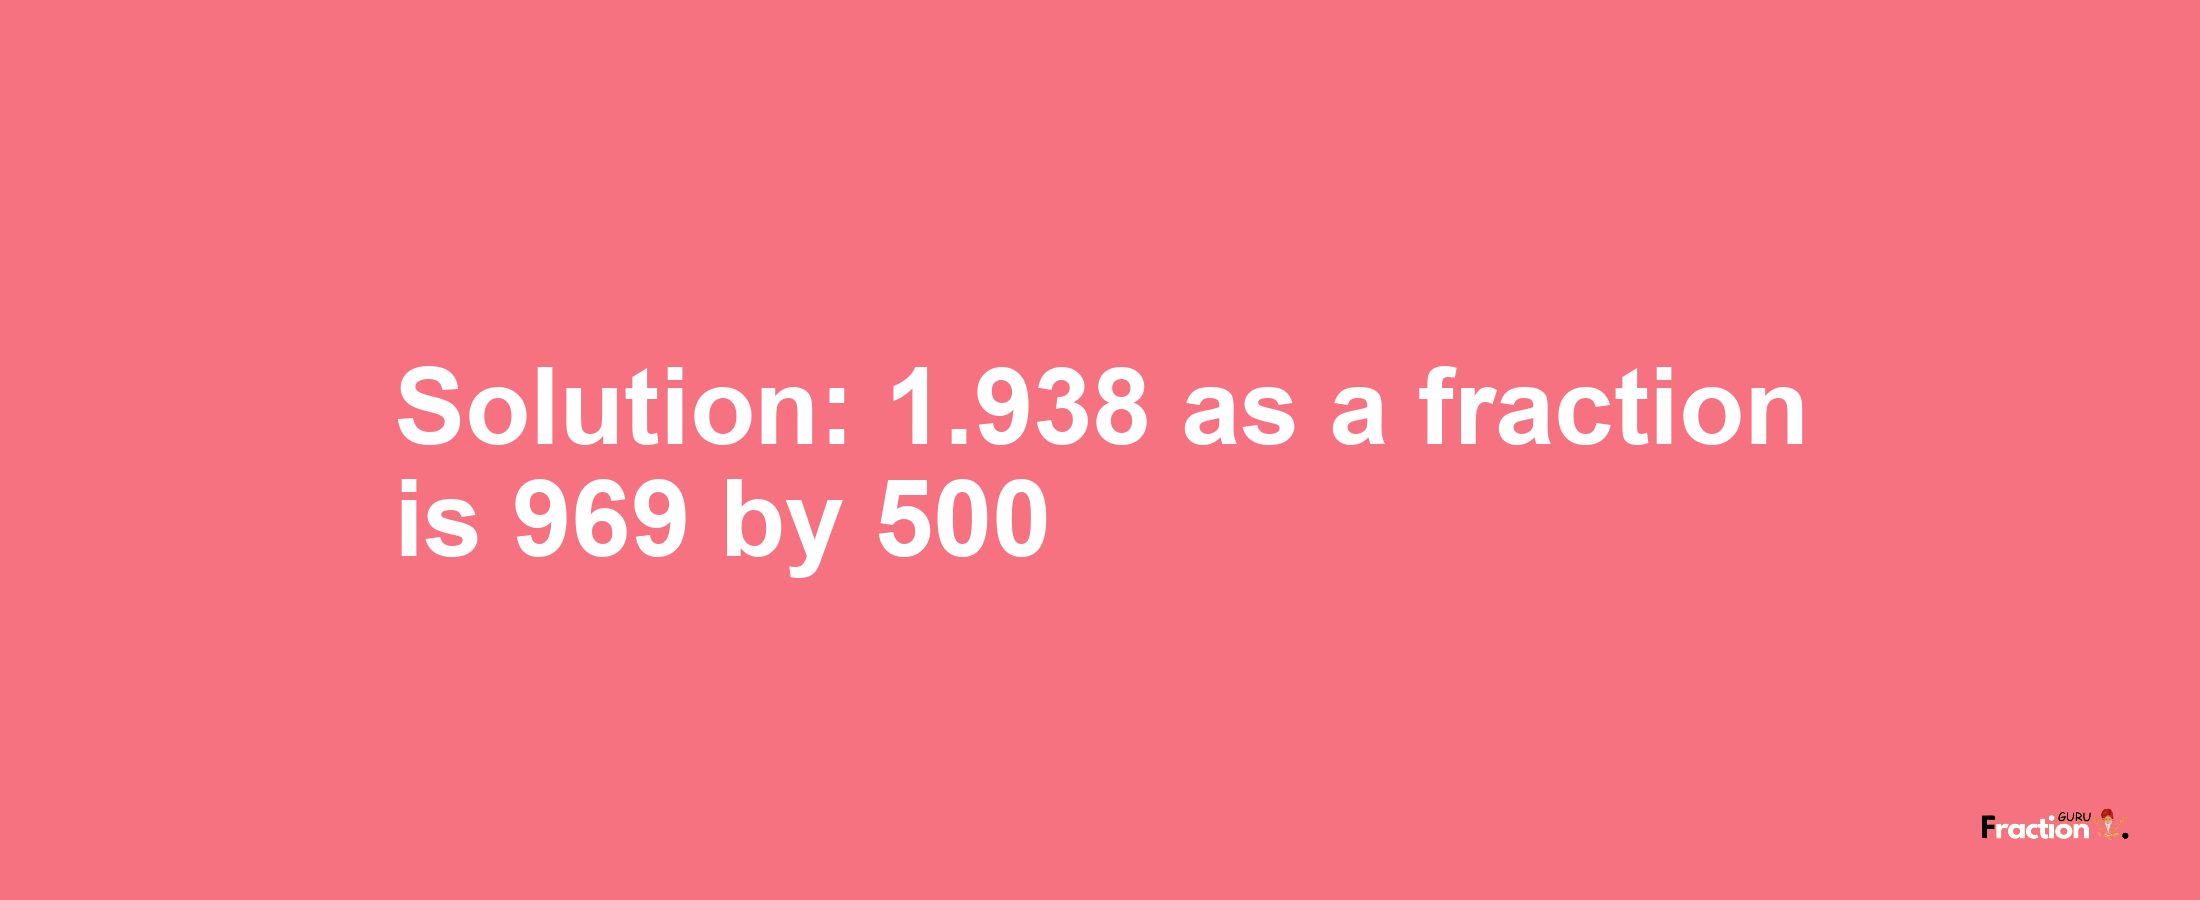 Solution:1.938 as a fraction is 969/500